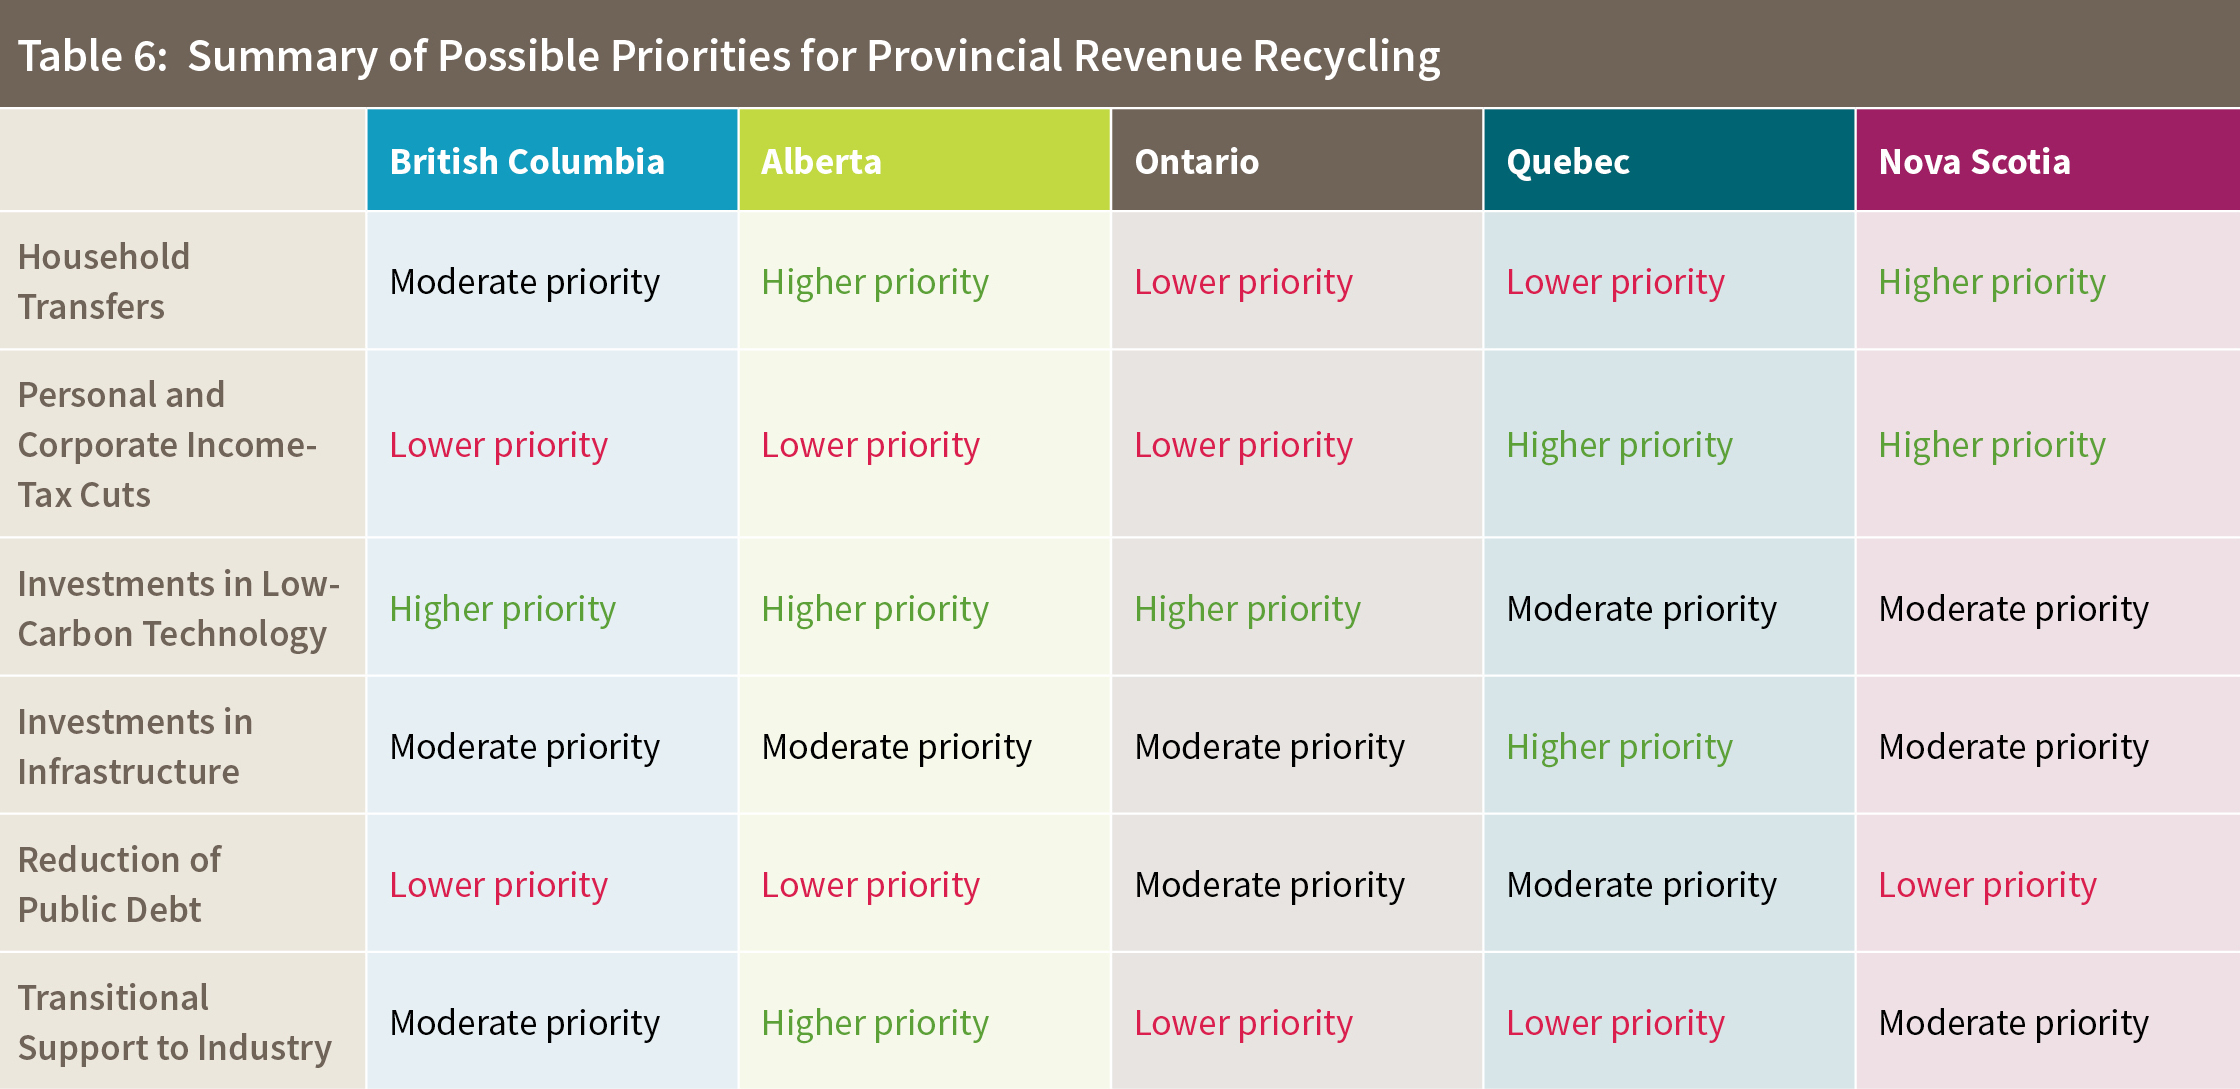 Table 6: Summary of Possible Priorities for Provincial Revenue Recycling